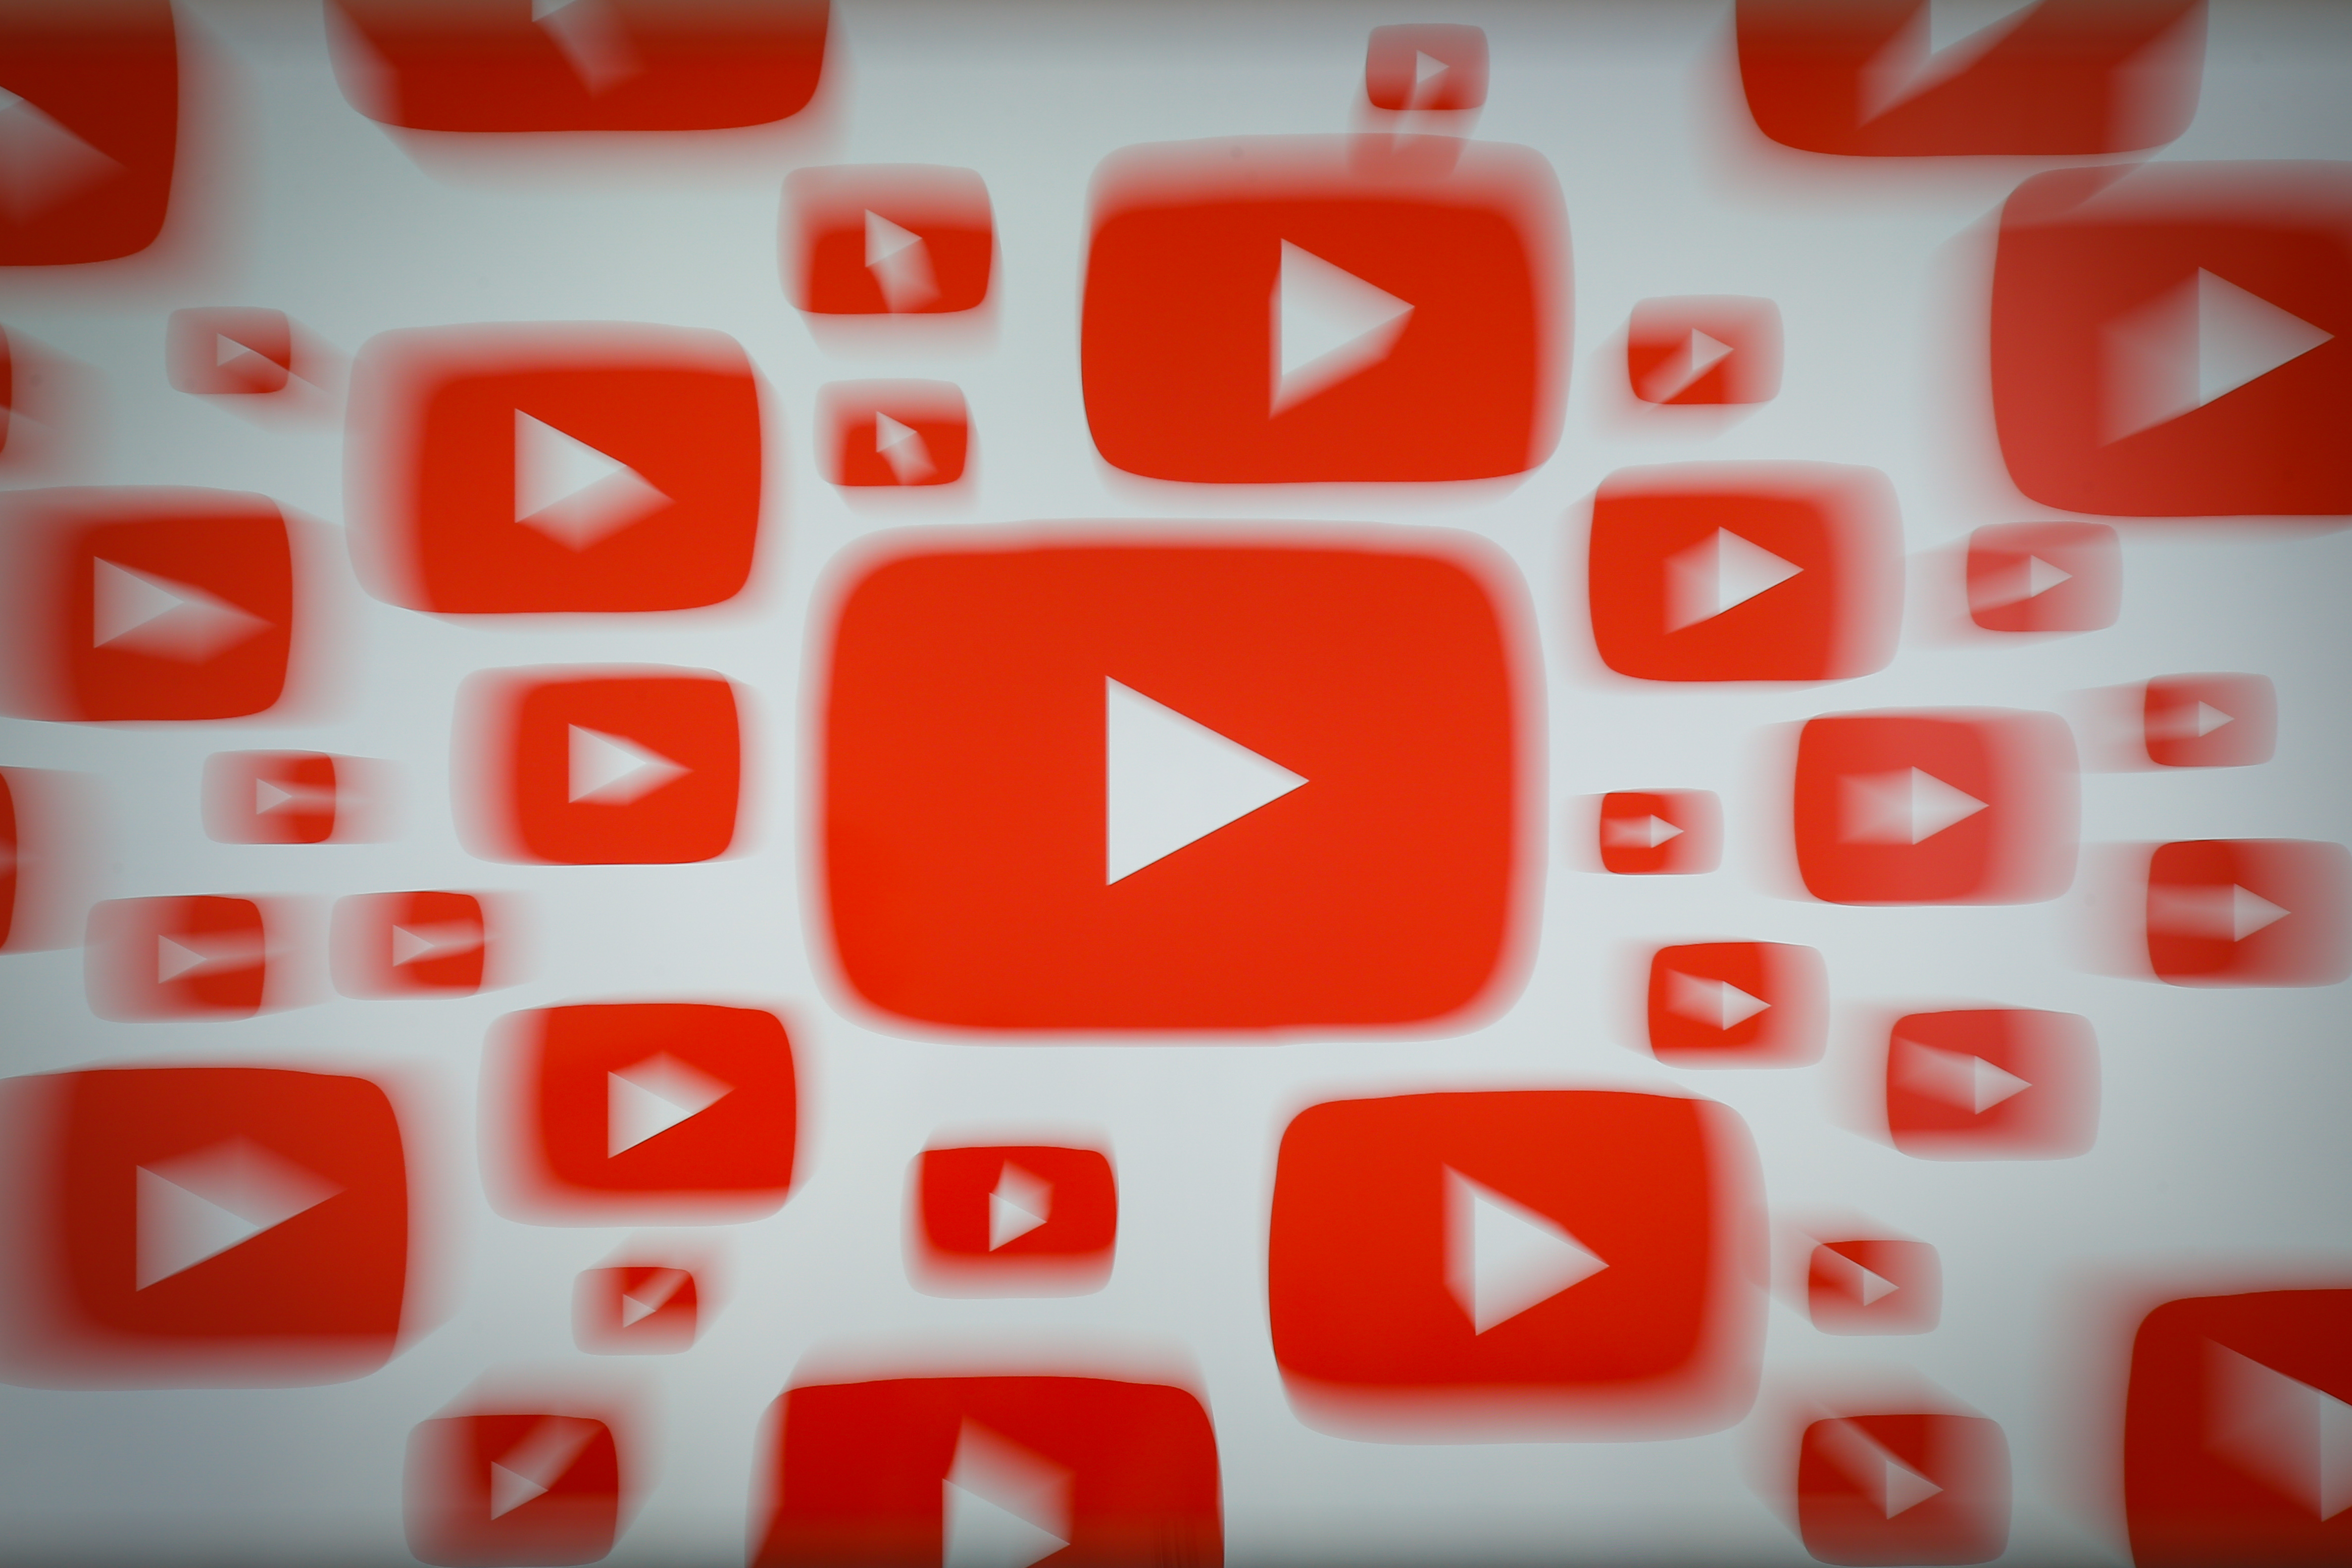 Several red and white YouTube “play” button logos.